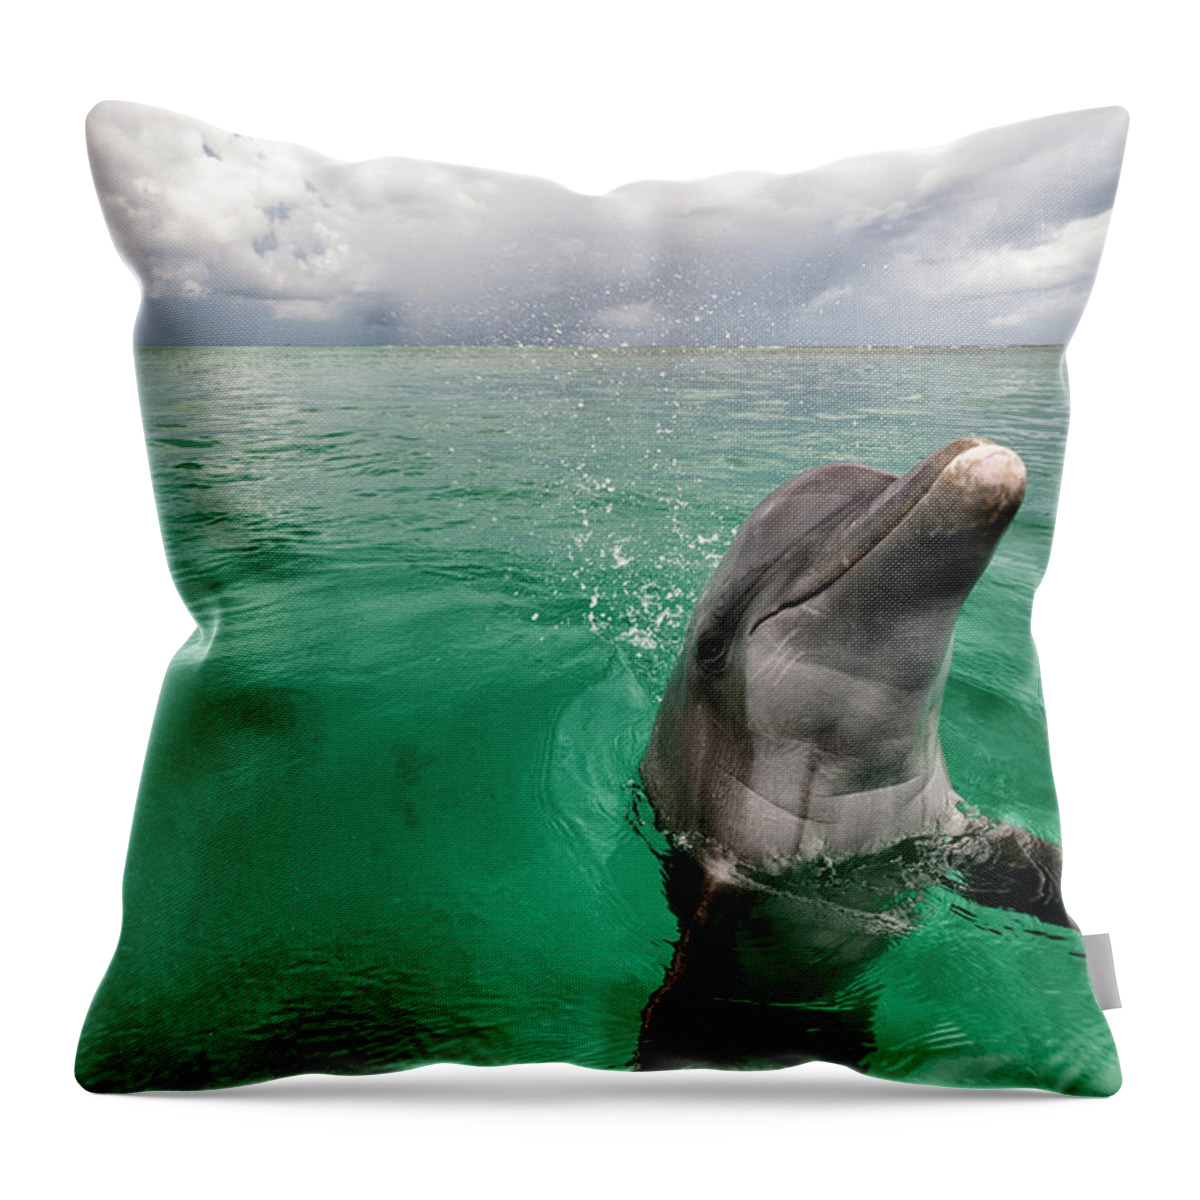 Scenics Throw Pillow featuring the photograph Bottlenose Dolphin In Shallow Water by Mike Hill